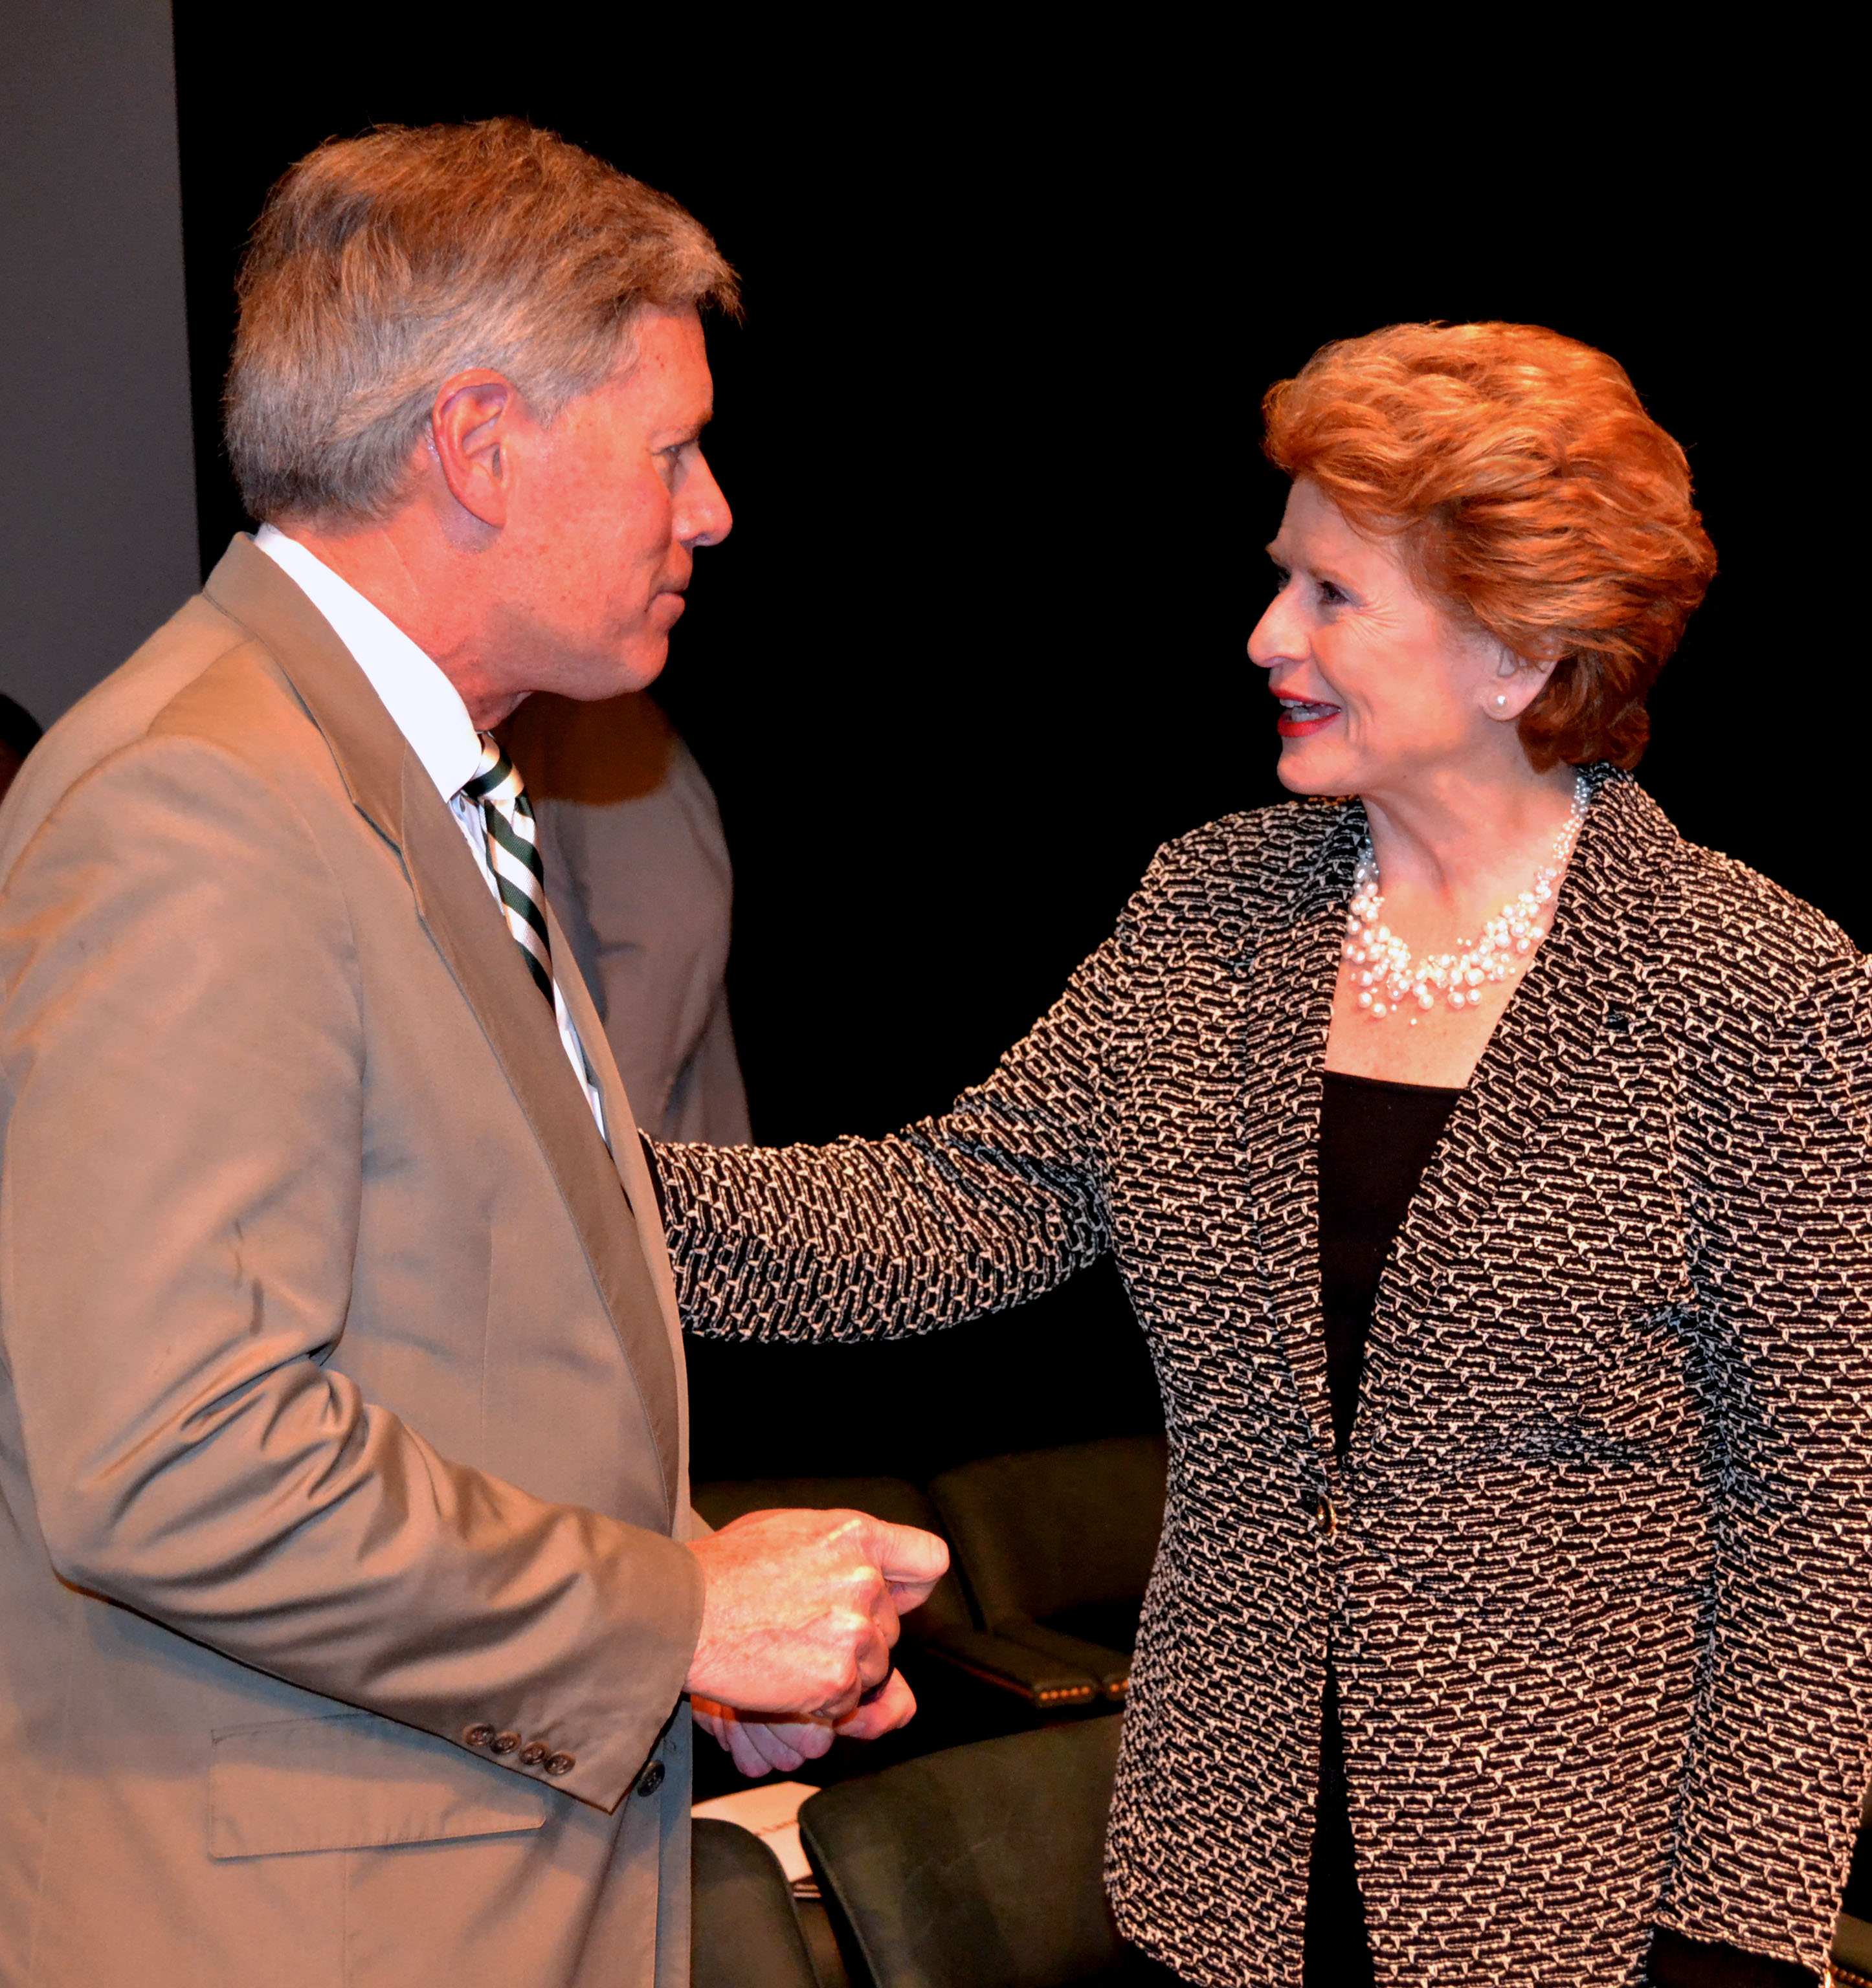 PHOTO:  Delta State University President William N. LaForge visits with United States Senator from Michigan and Chairwoman of the Senate Committee on Agriculture, Forestry and Nutrition Debbie Stabenow who was the featured speaker at the 78th annual Delta Council hosted by Delta State University.